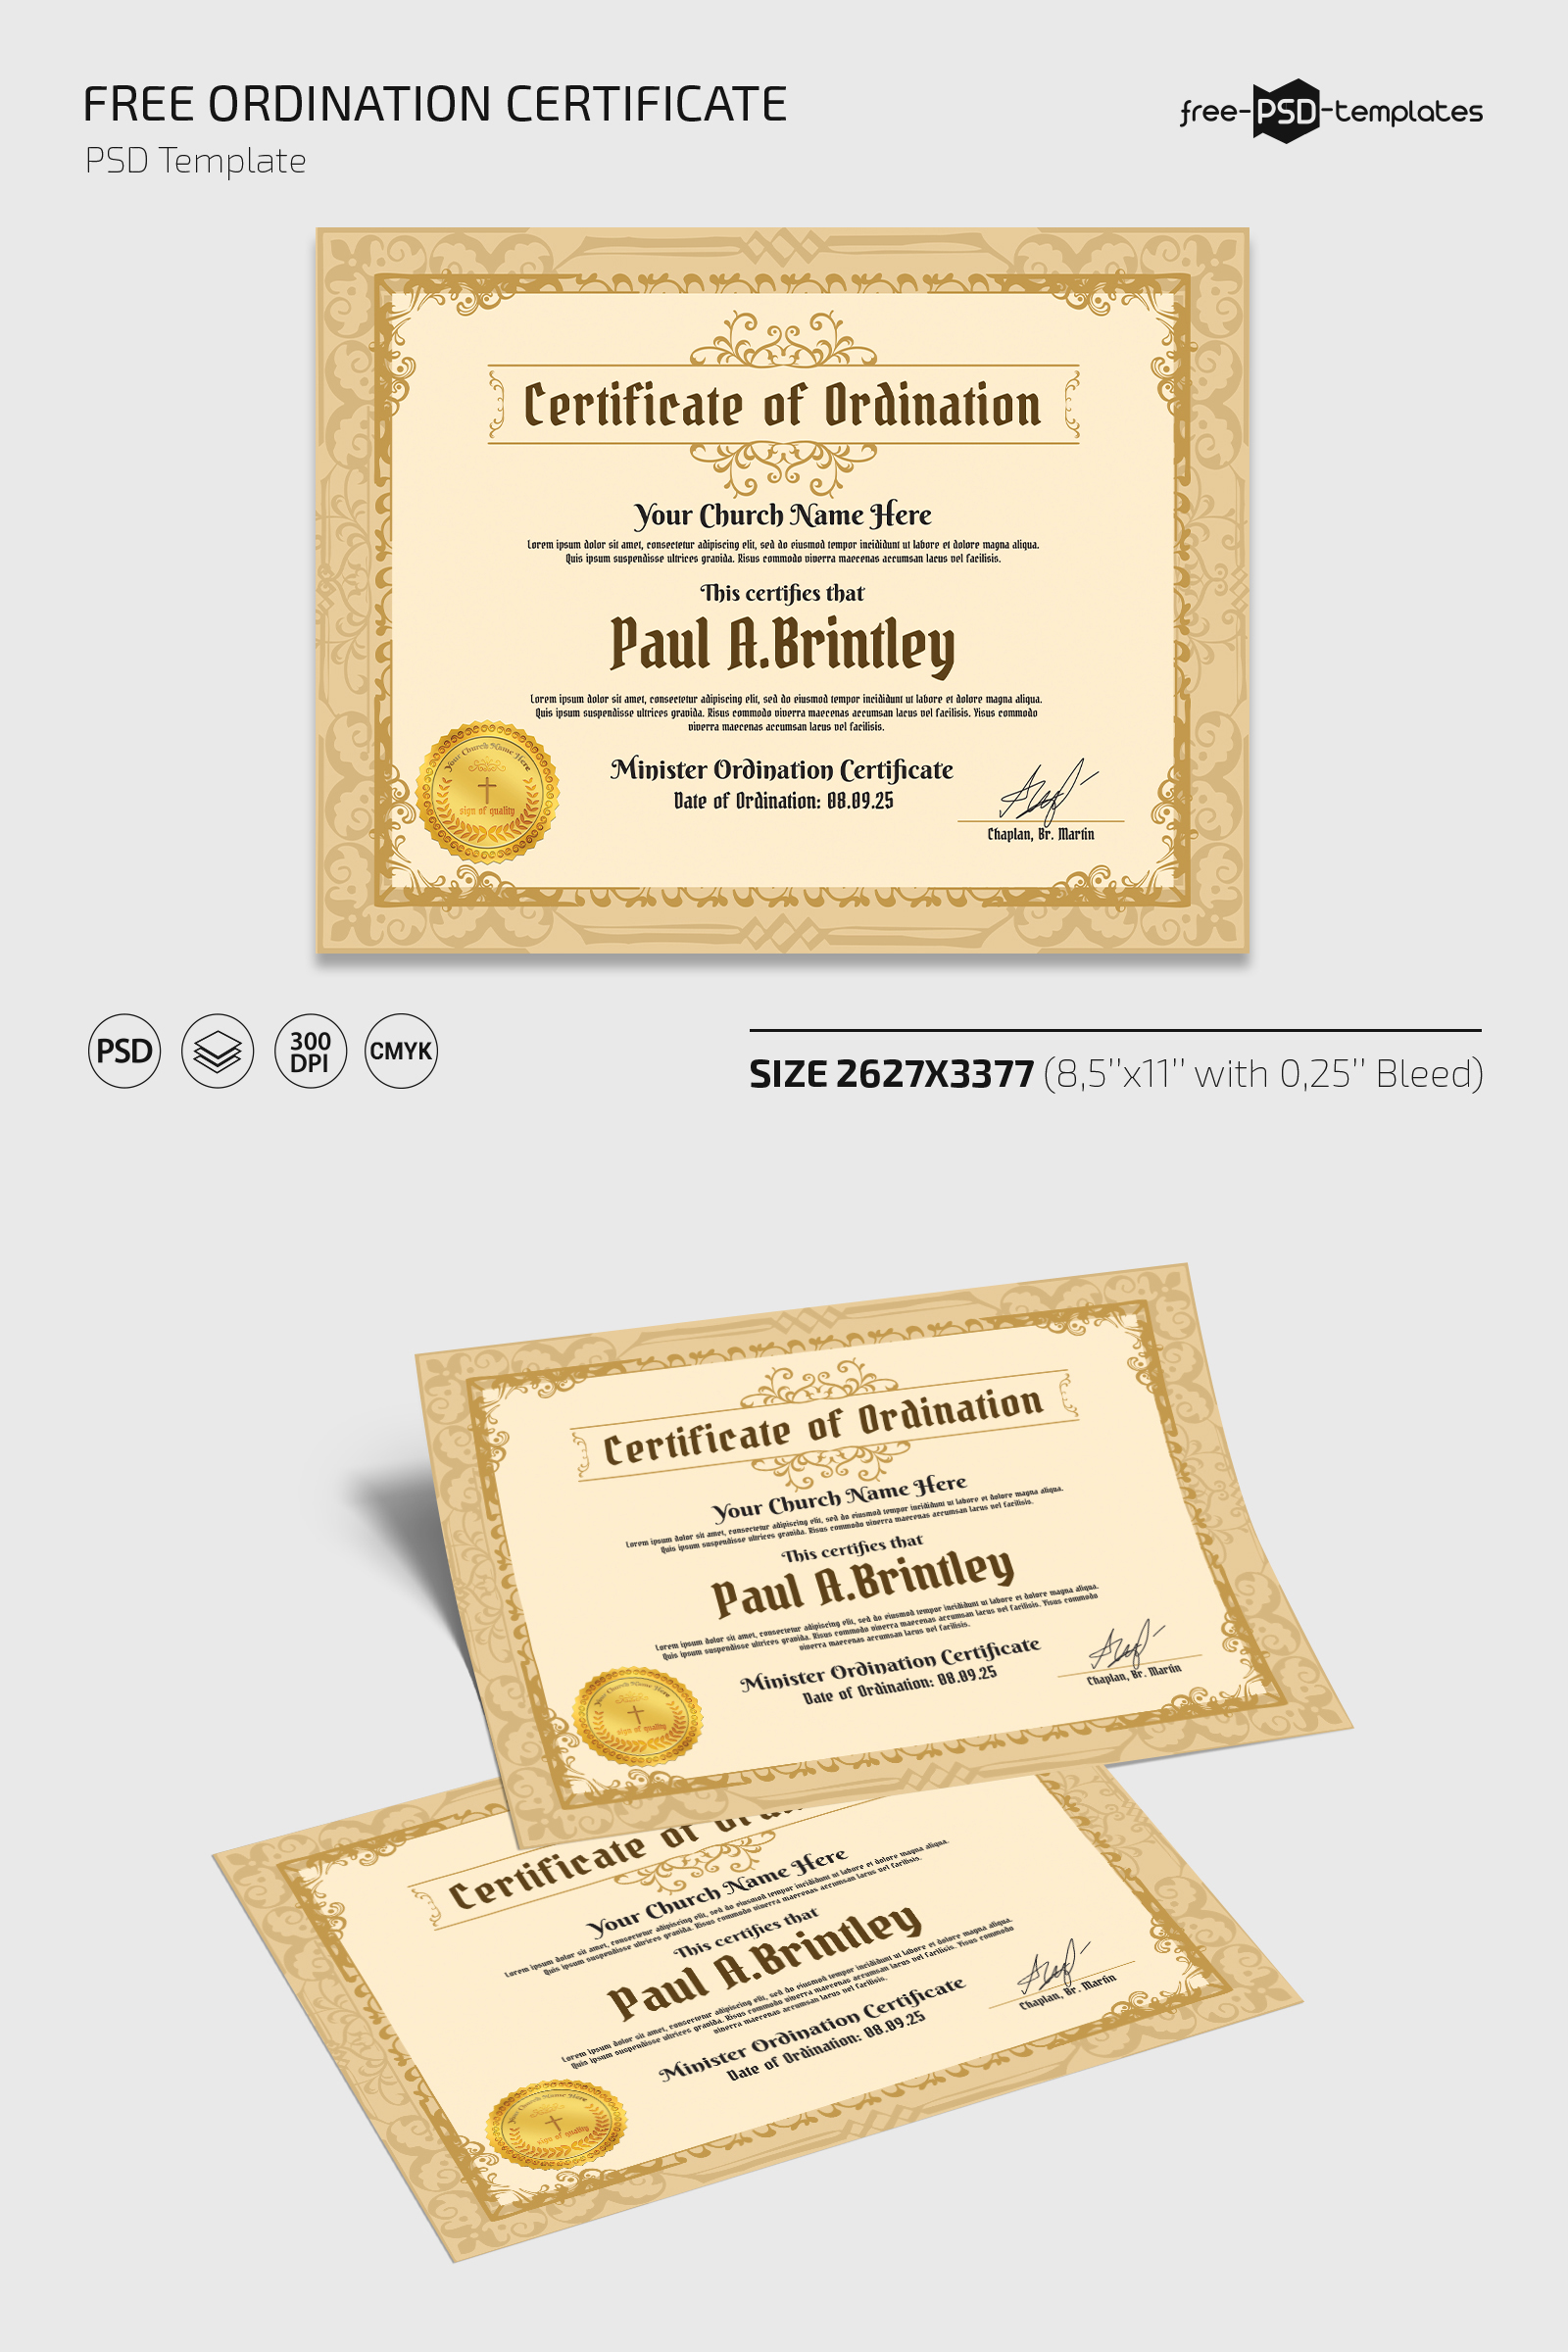 free-ordination-certificate-template-for-photoshop-psd